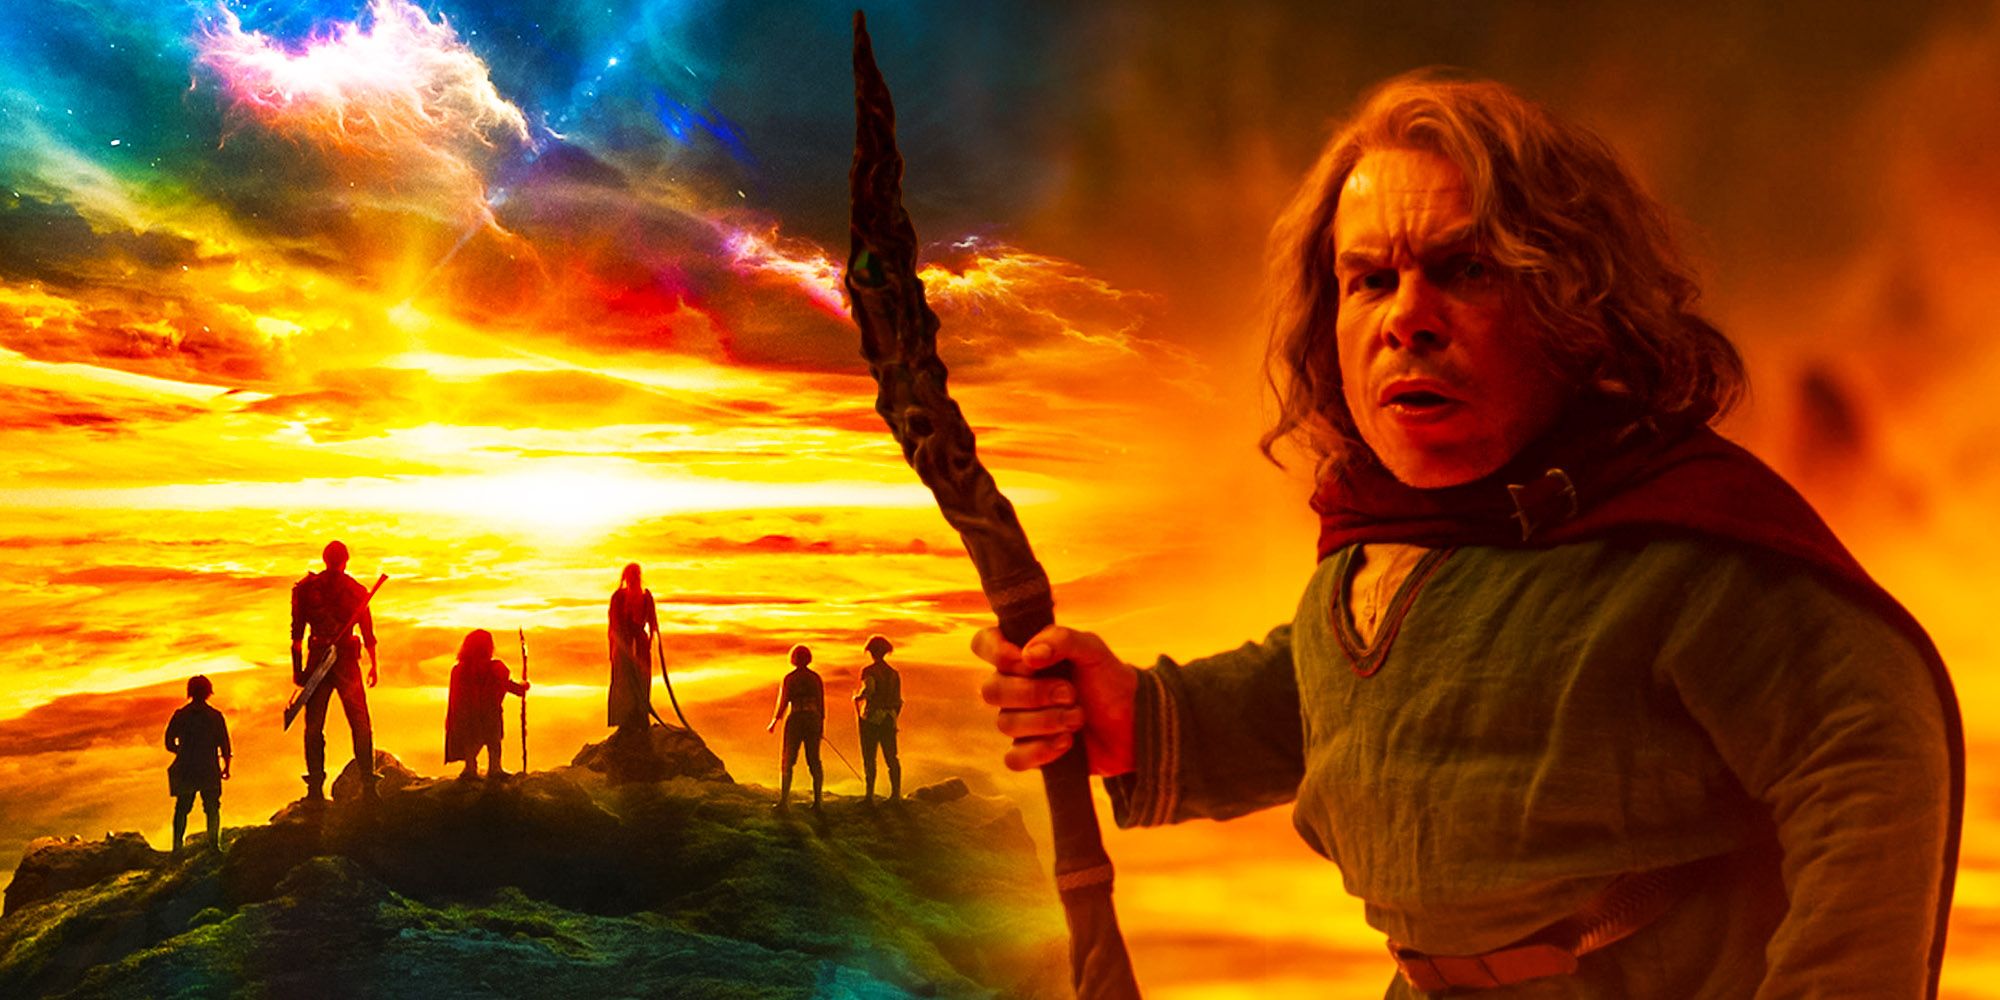 Custom image of Willow's characters next to Warwick Davis in Willow